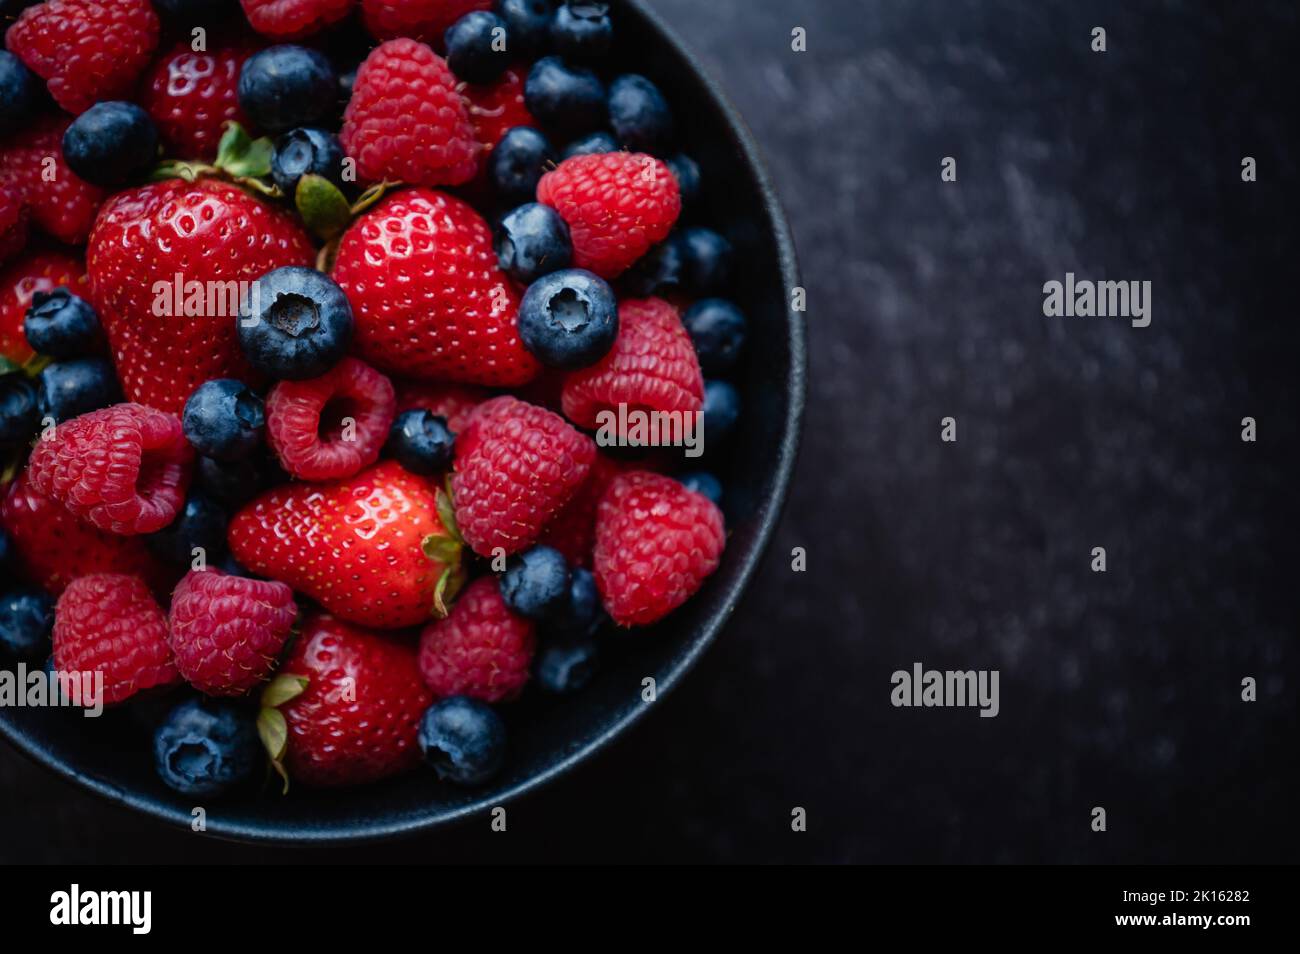 Overhead of bowl of fresh mixed berries on black background. Stock Photo